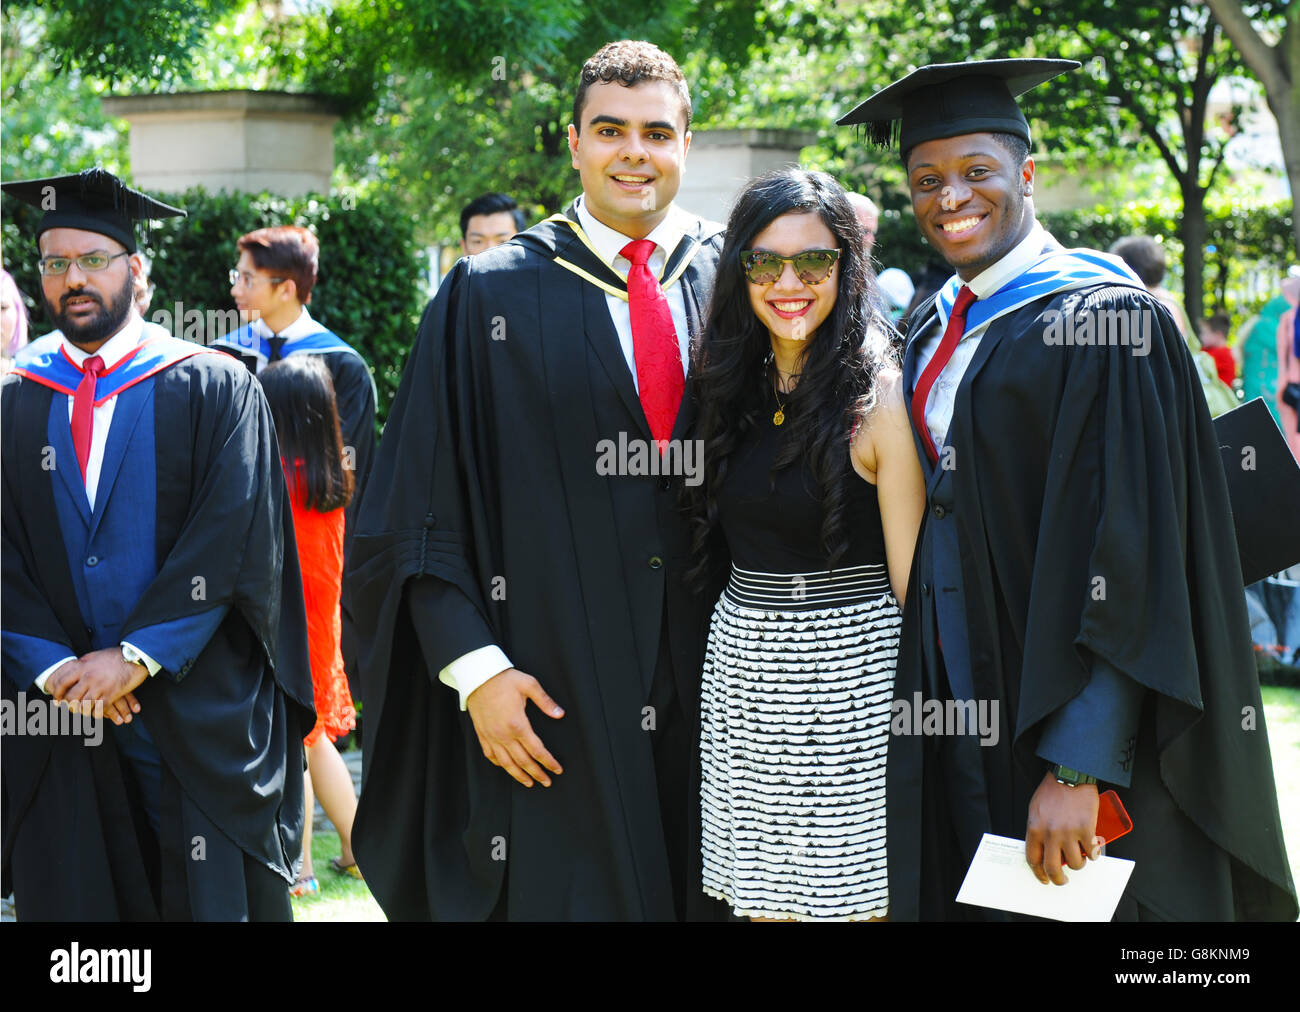 Joyful graduating students in professional gowns posing with lovely girlfriend with long black hair on Graduation Day at Queen Mary London University. Stock Photo